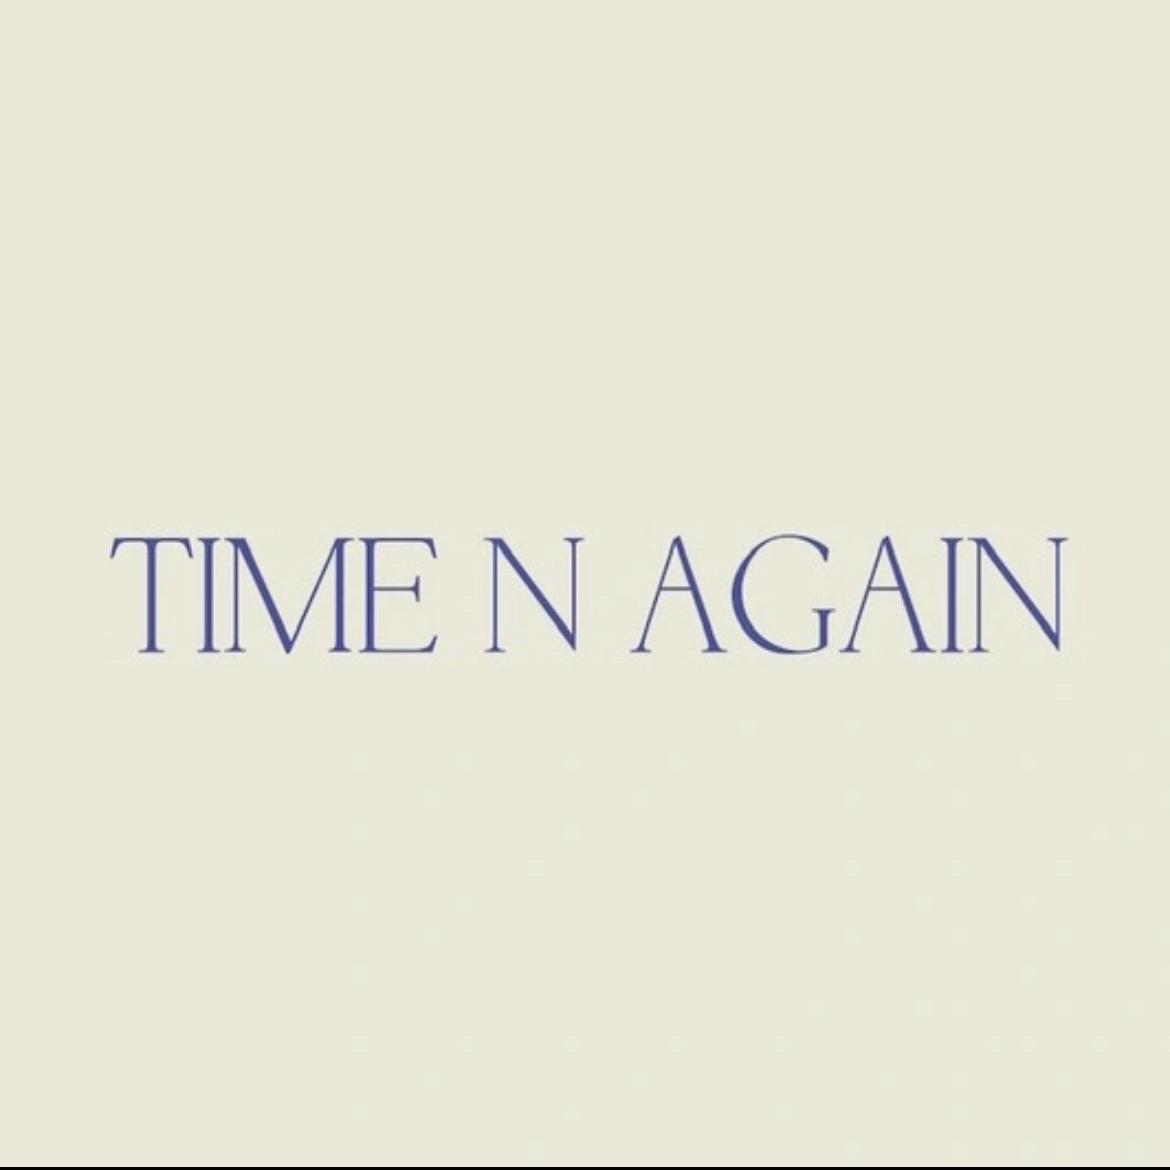 Time n again 's images